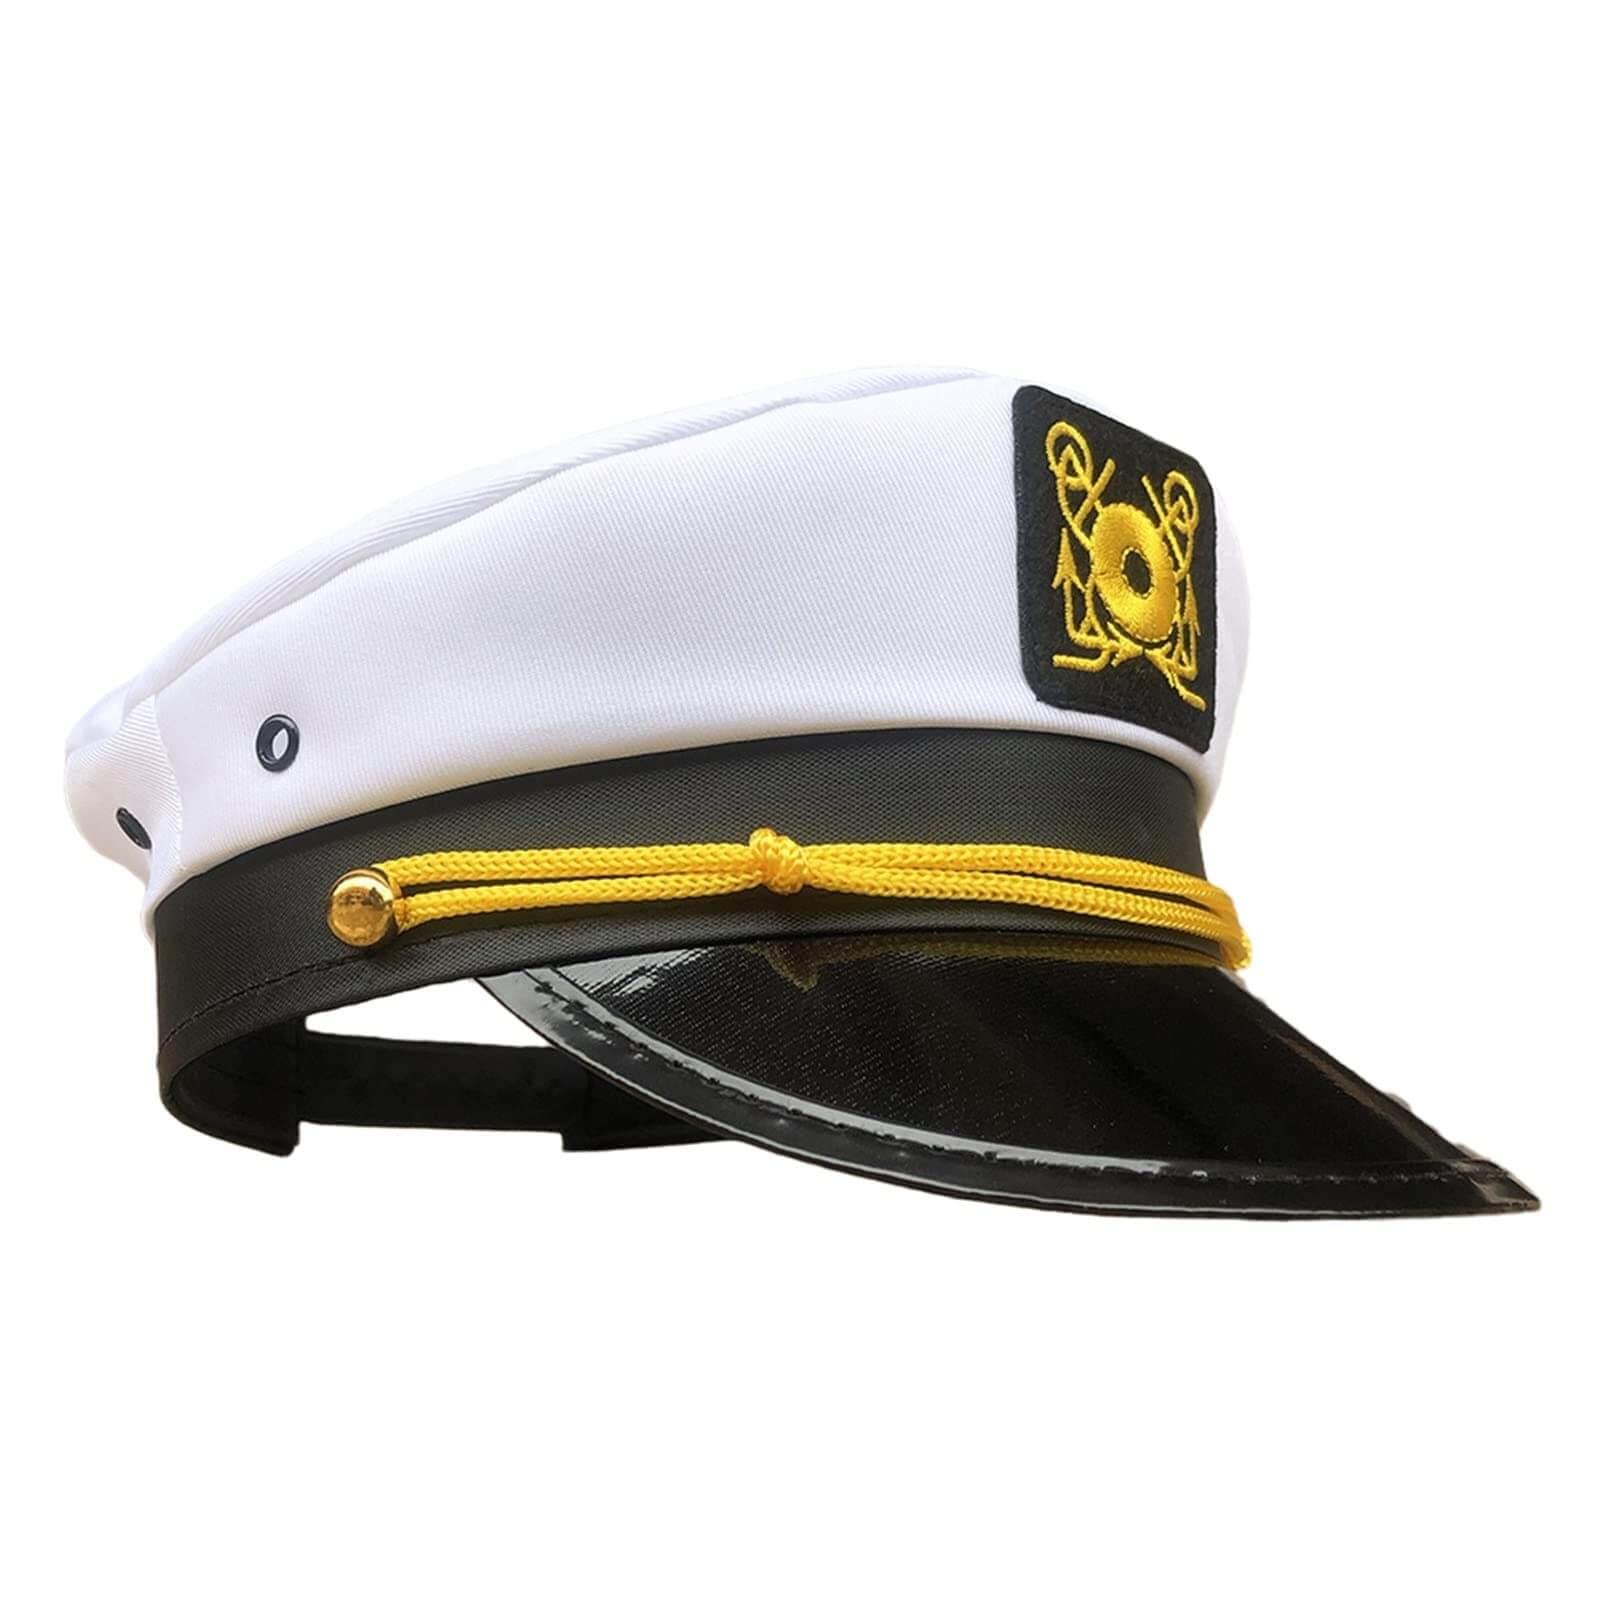 Customizable Captain Hat Yacht Boat Navy Sailor Ship Cap for Kids Marines  Costume Accessory white, black